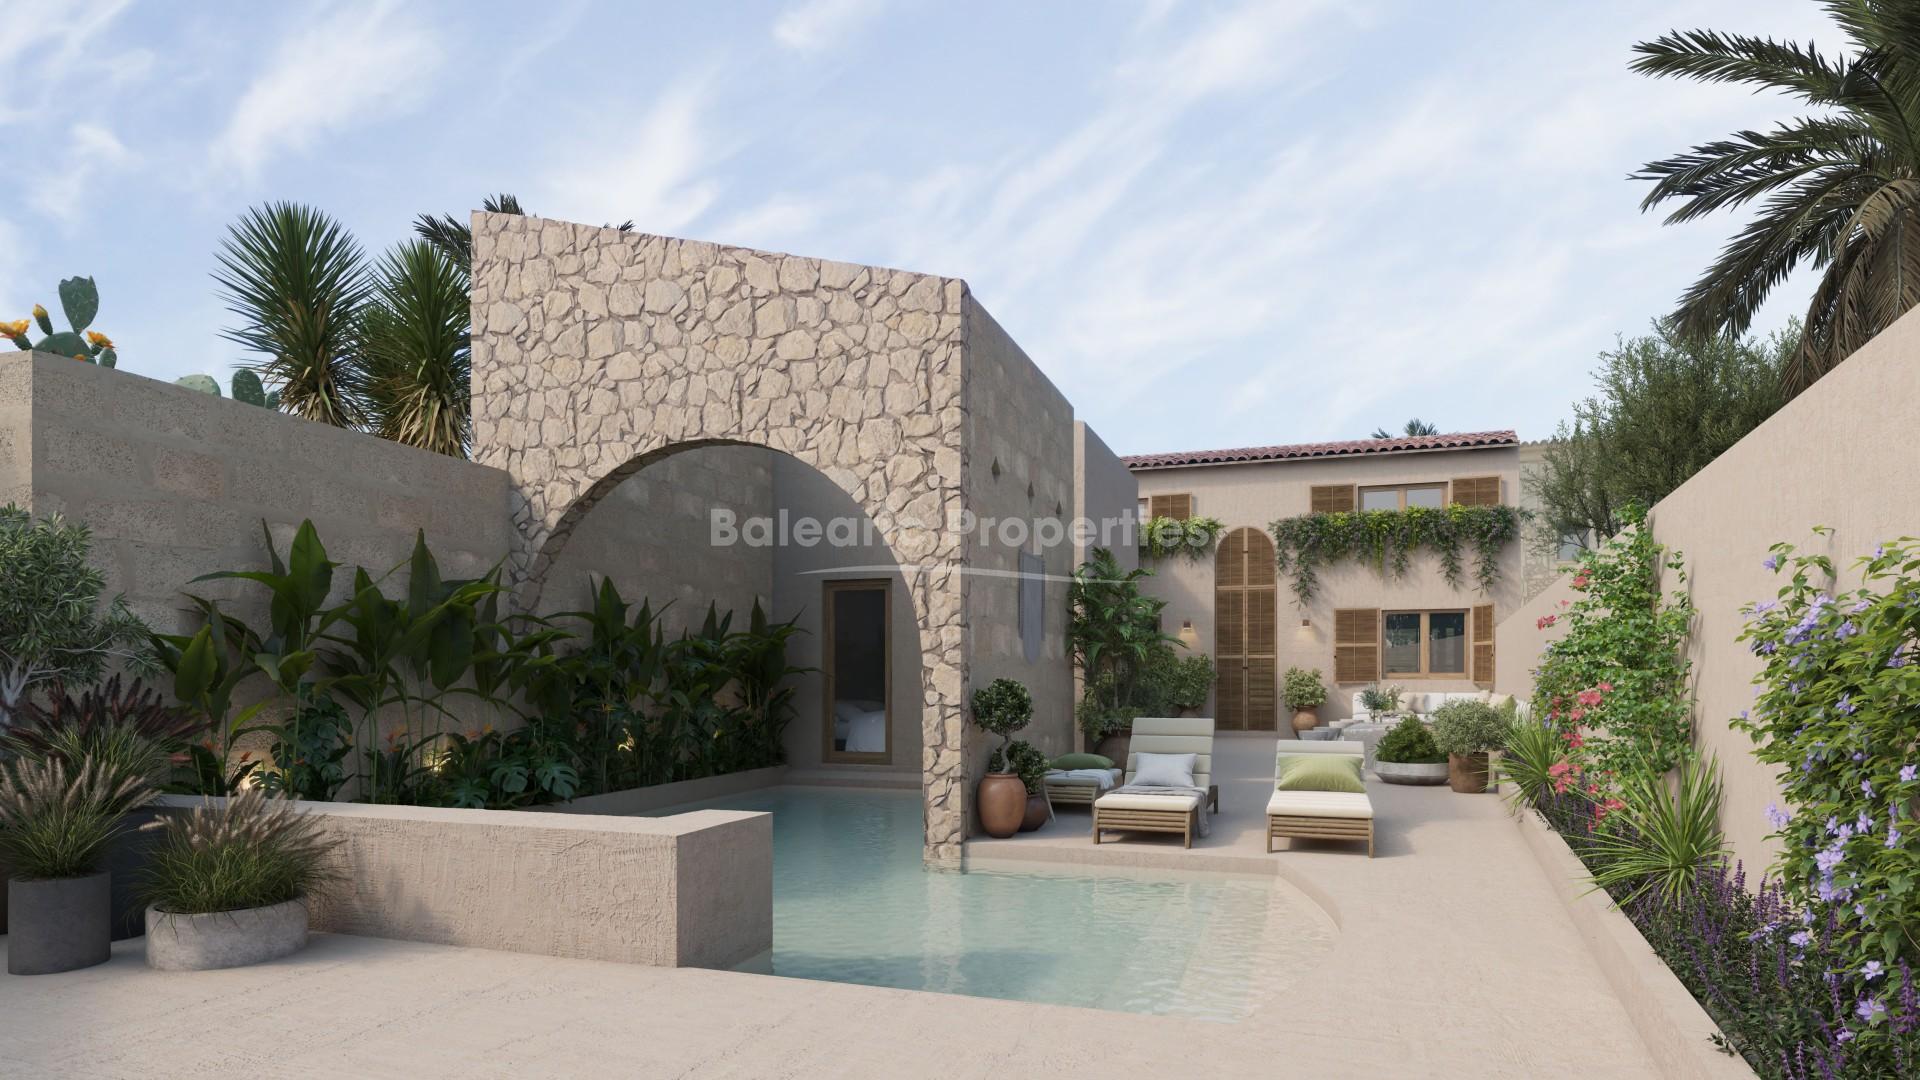 Elegantly renovated house with pool for sale in Muro, Mallorca